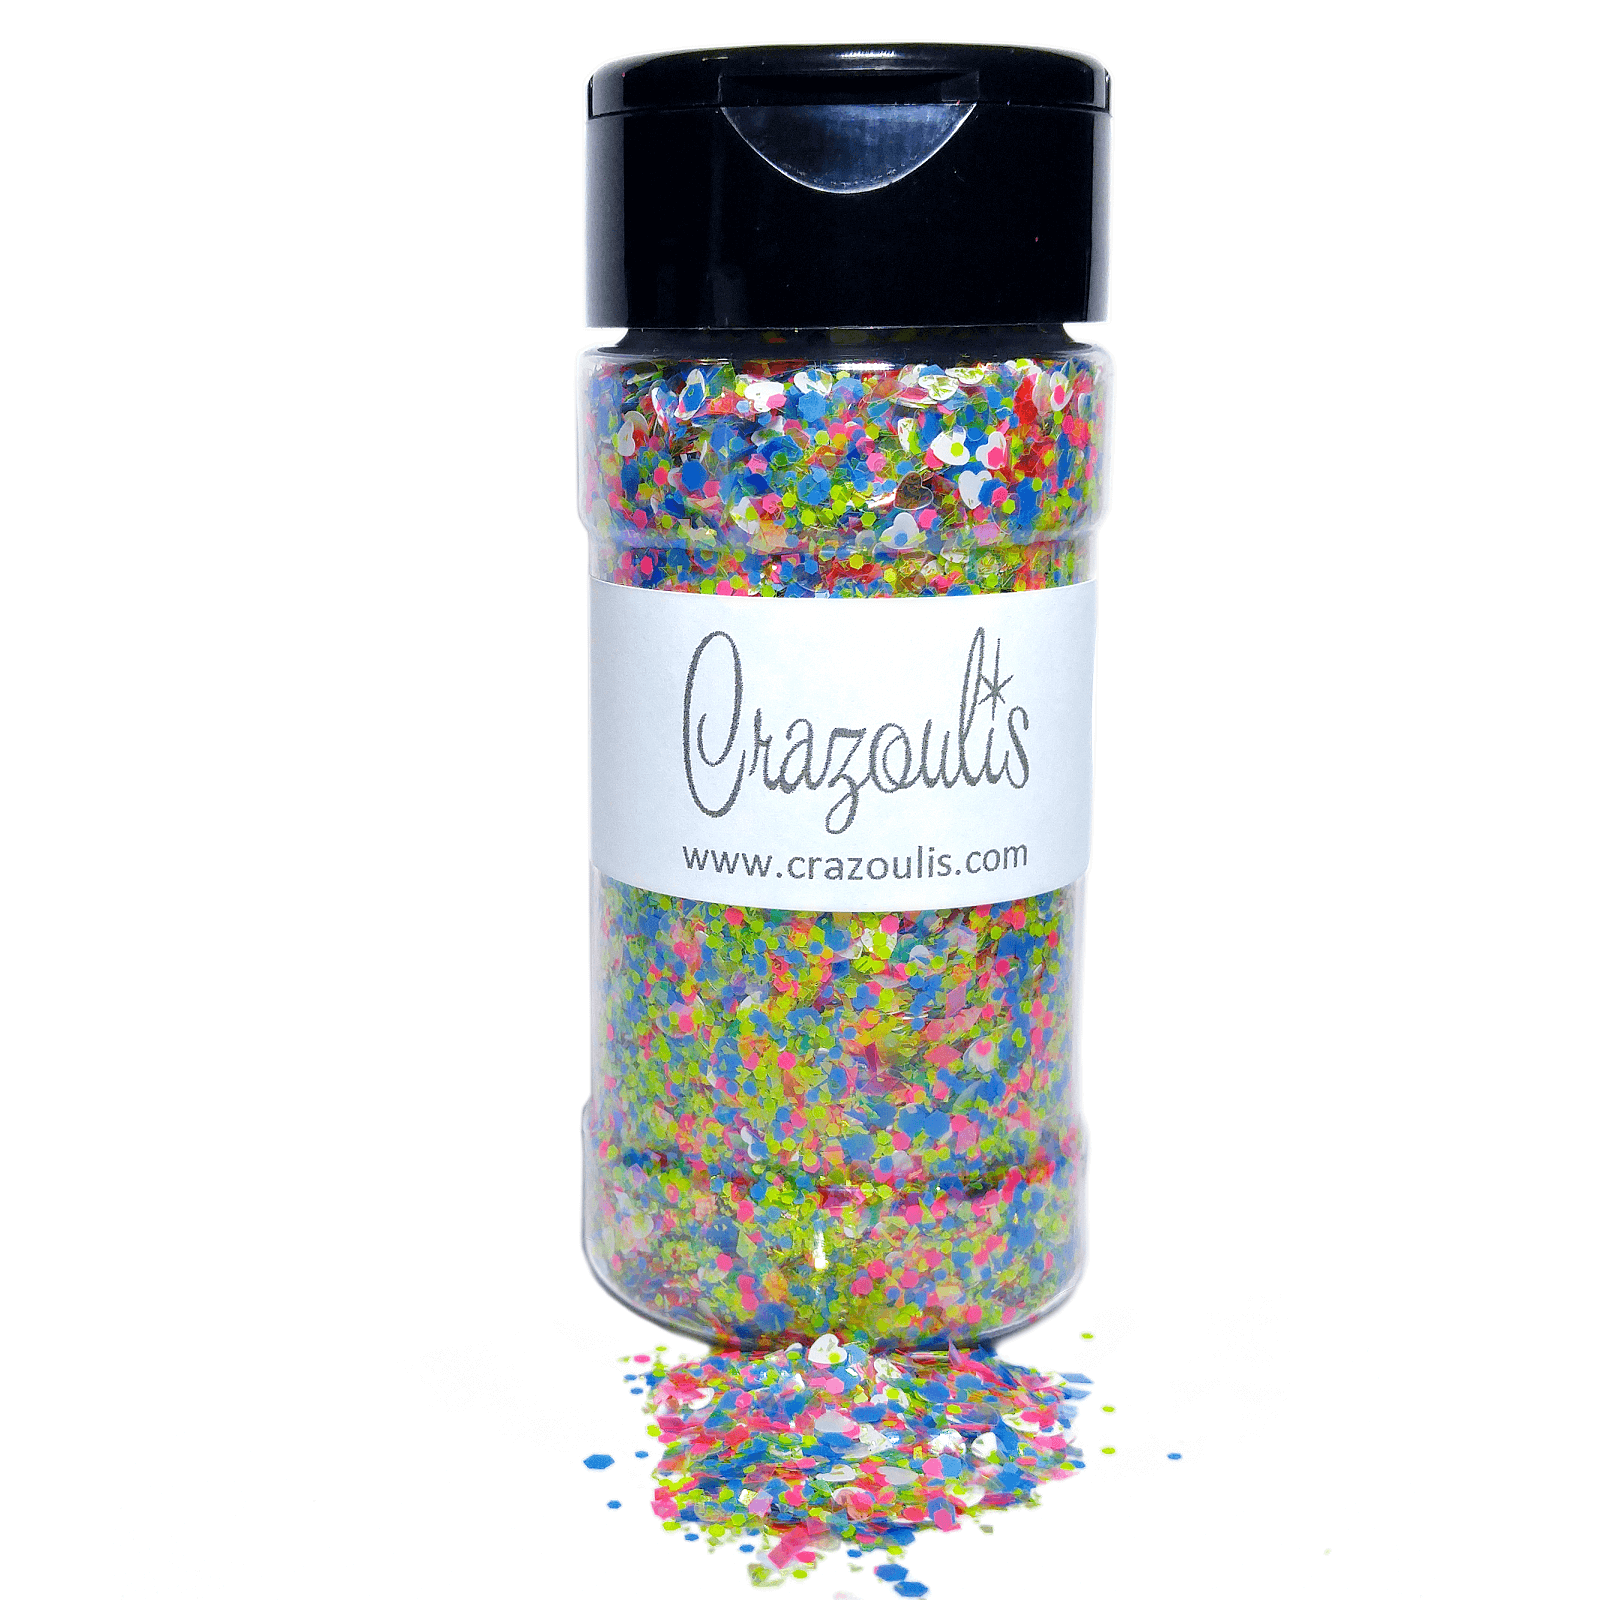 Neon Chunky Blacklight Activated Glitter Mix By Crazoulis Glitter